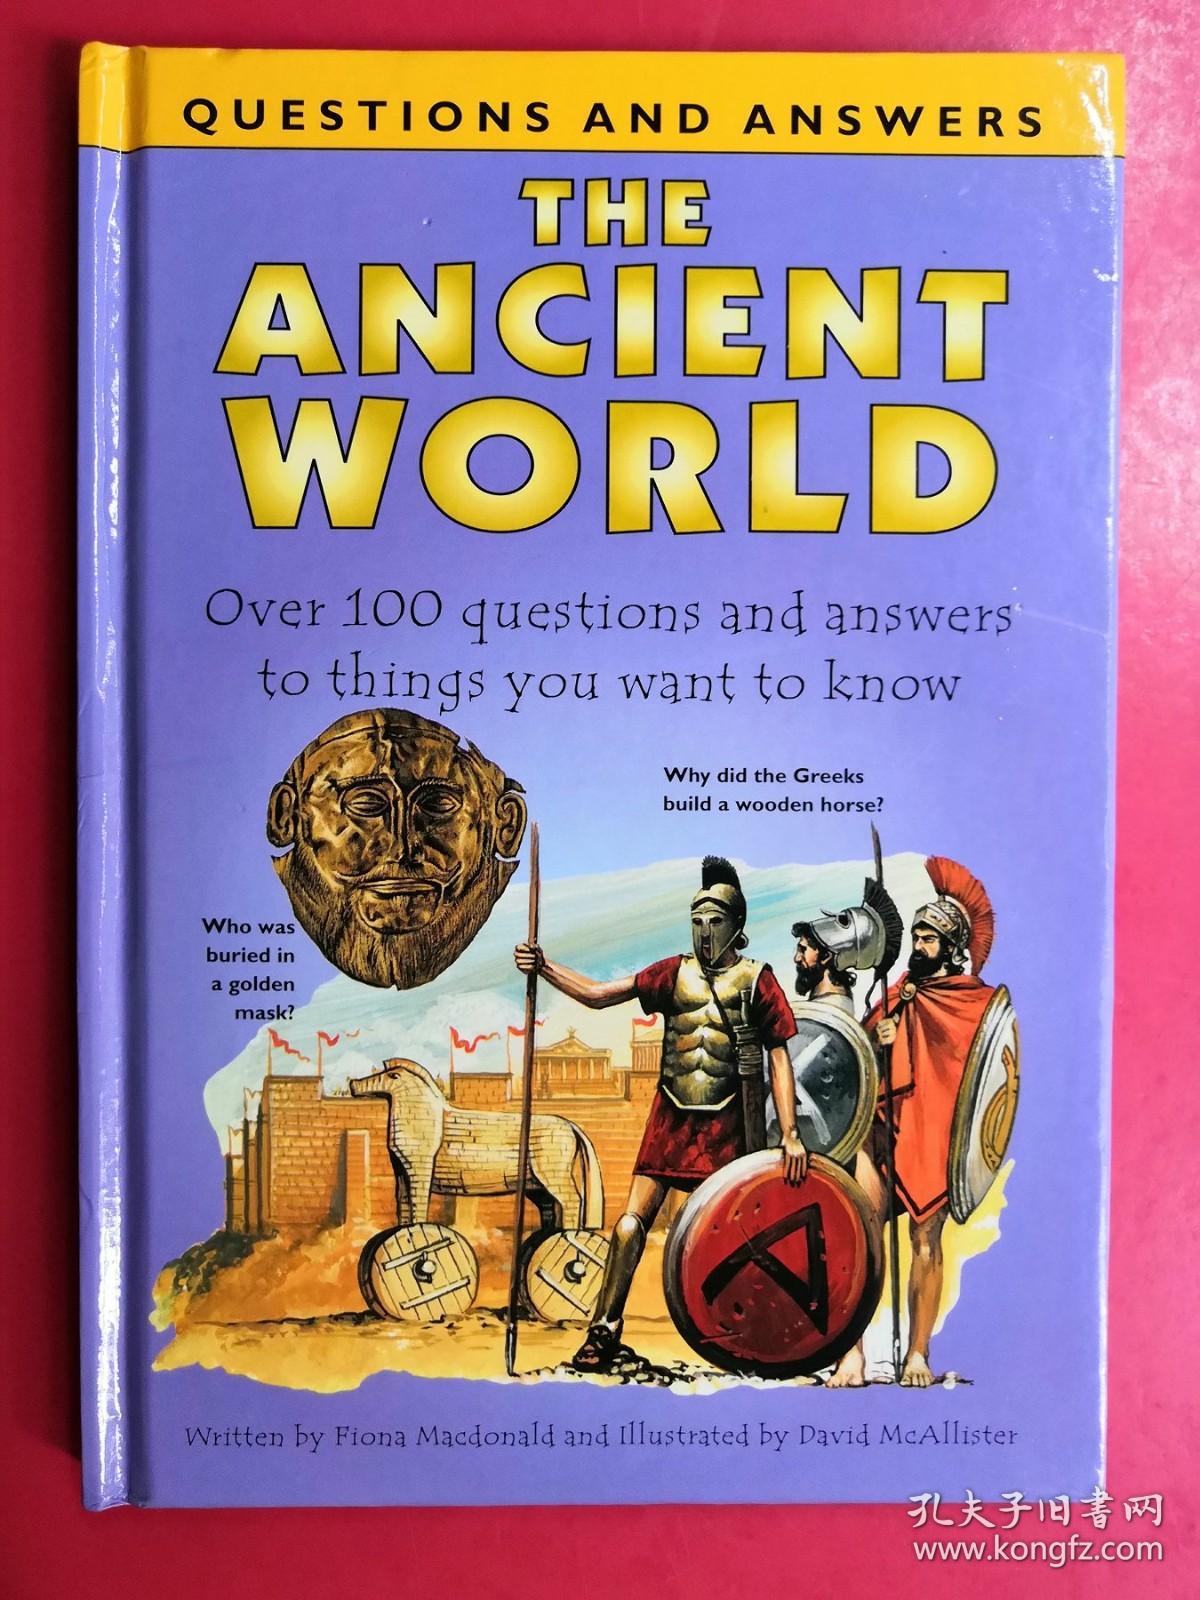 QUESTIONS AND ANSWERS:THE ANCIENT WORLD